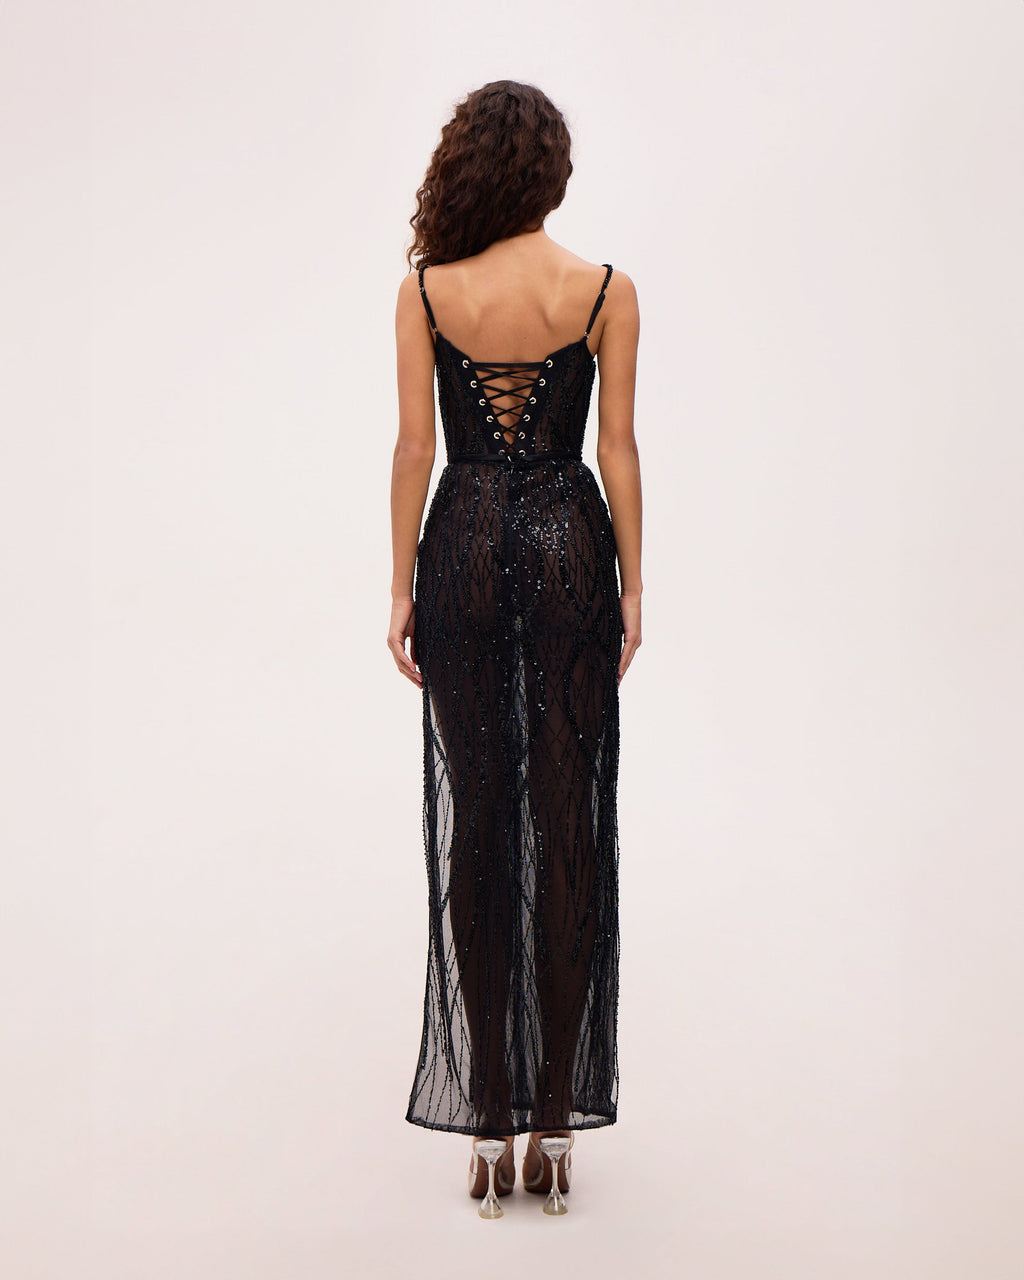 Astonishing sequined maxi gown on spaghetti straps